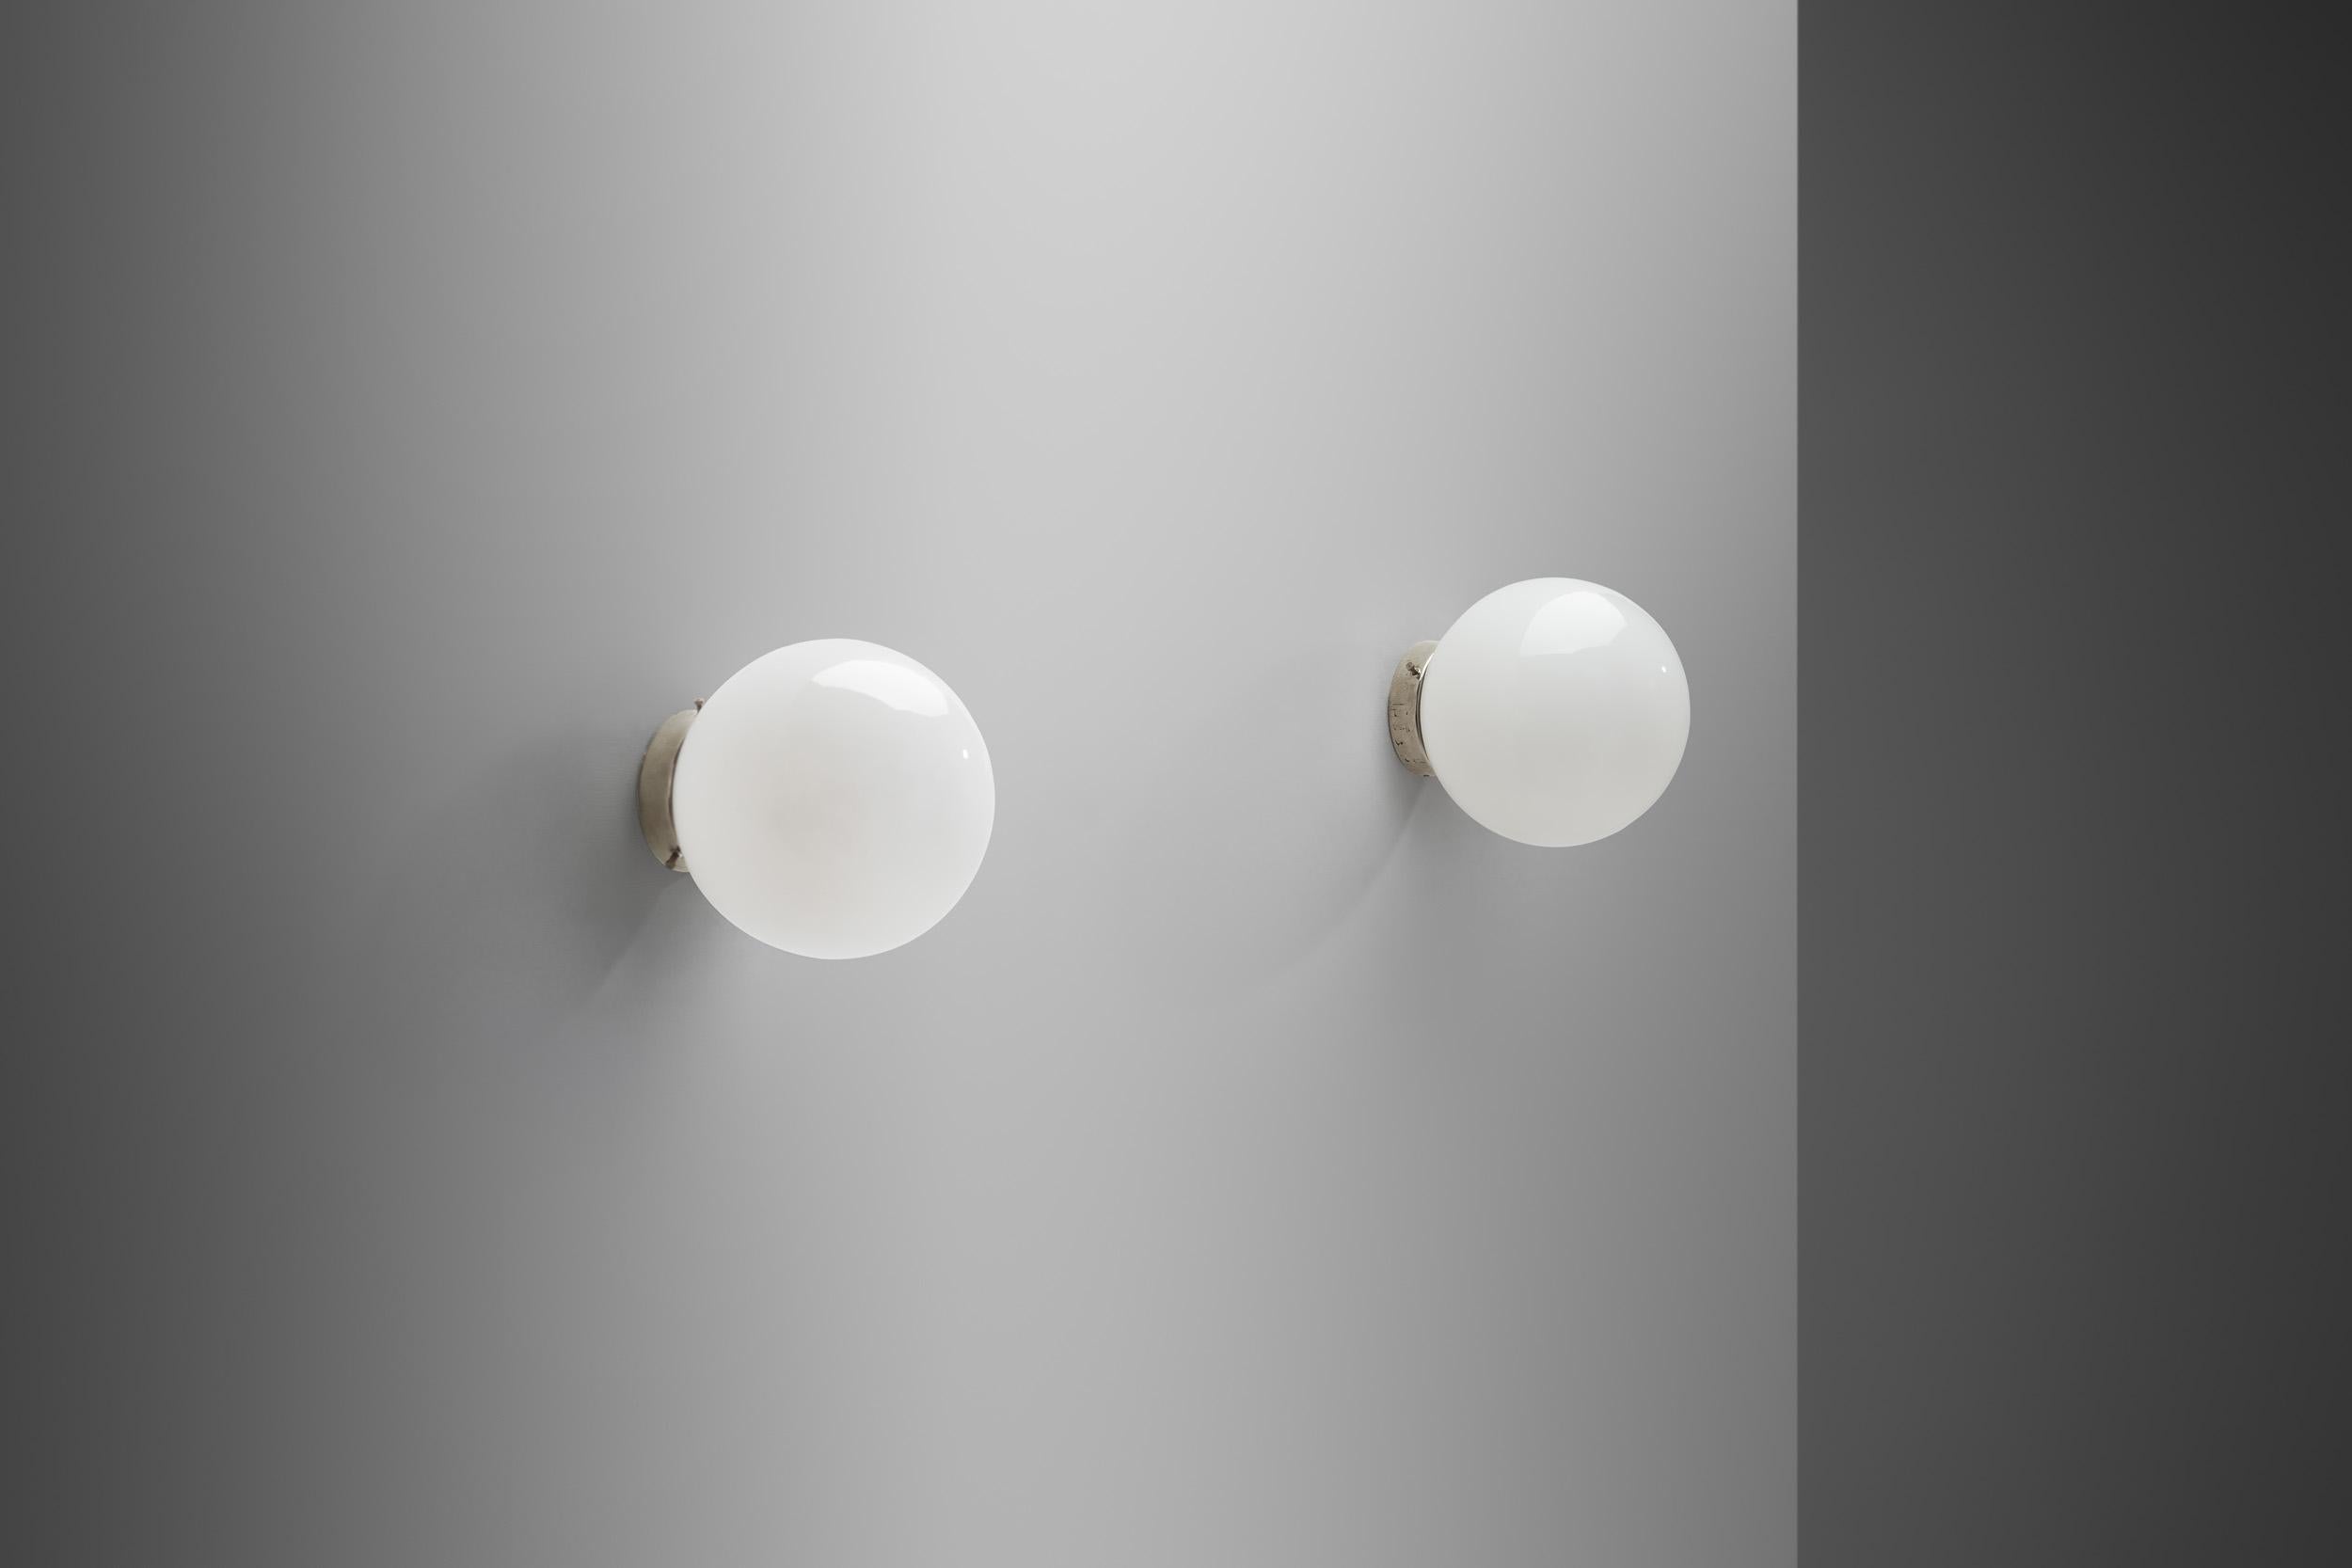 Mid-Century Modern Paavo Tynell Model “2008” Ceiling Lights for Idman Oy, Finland 1950s